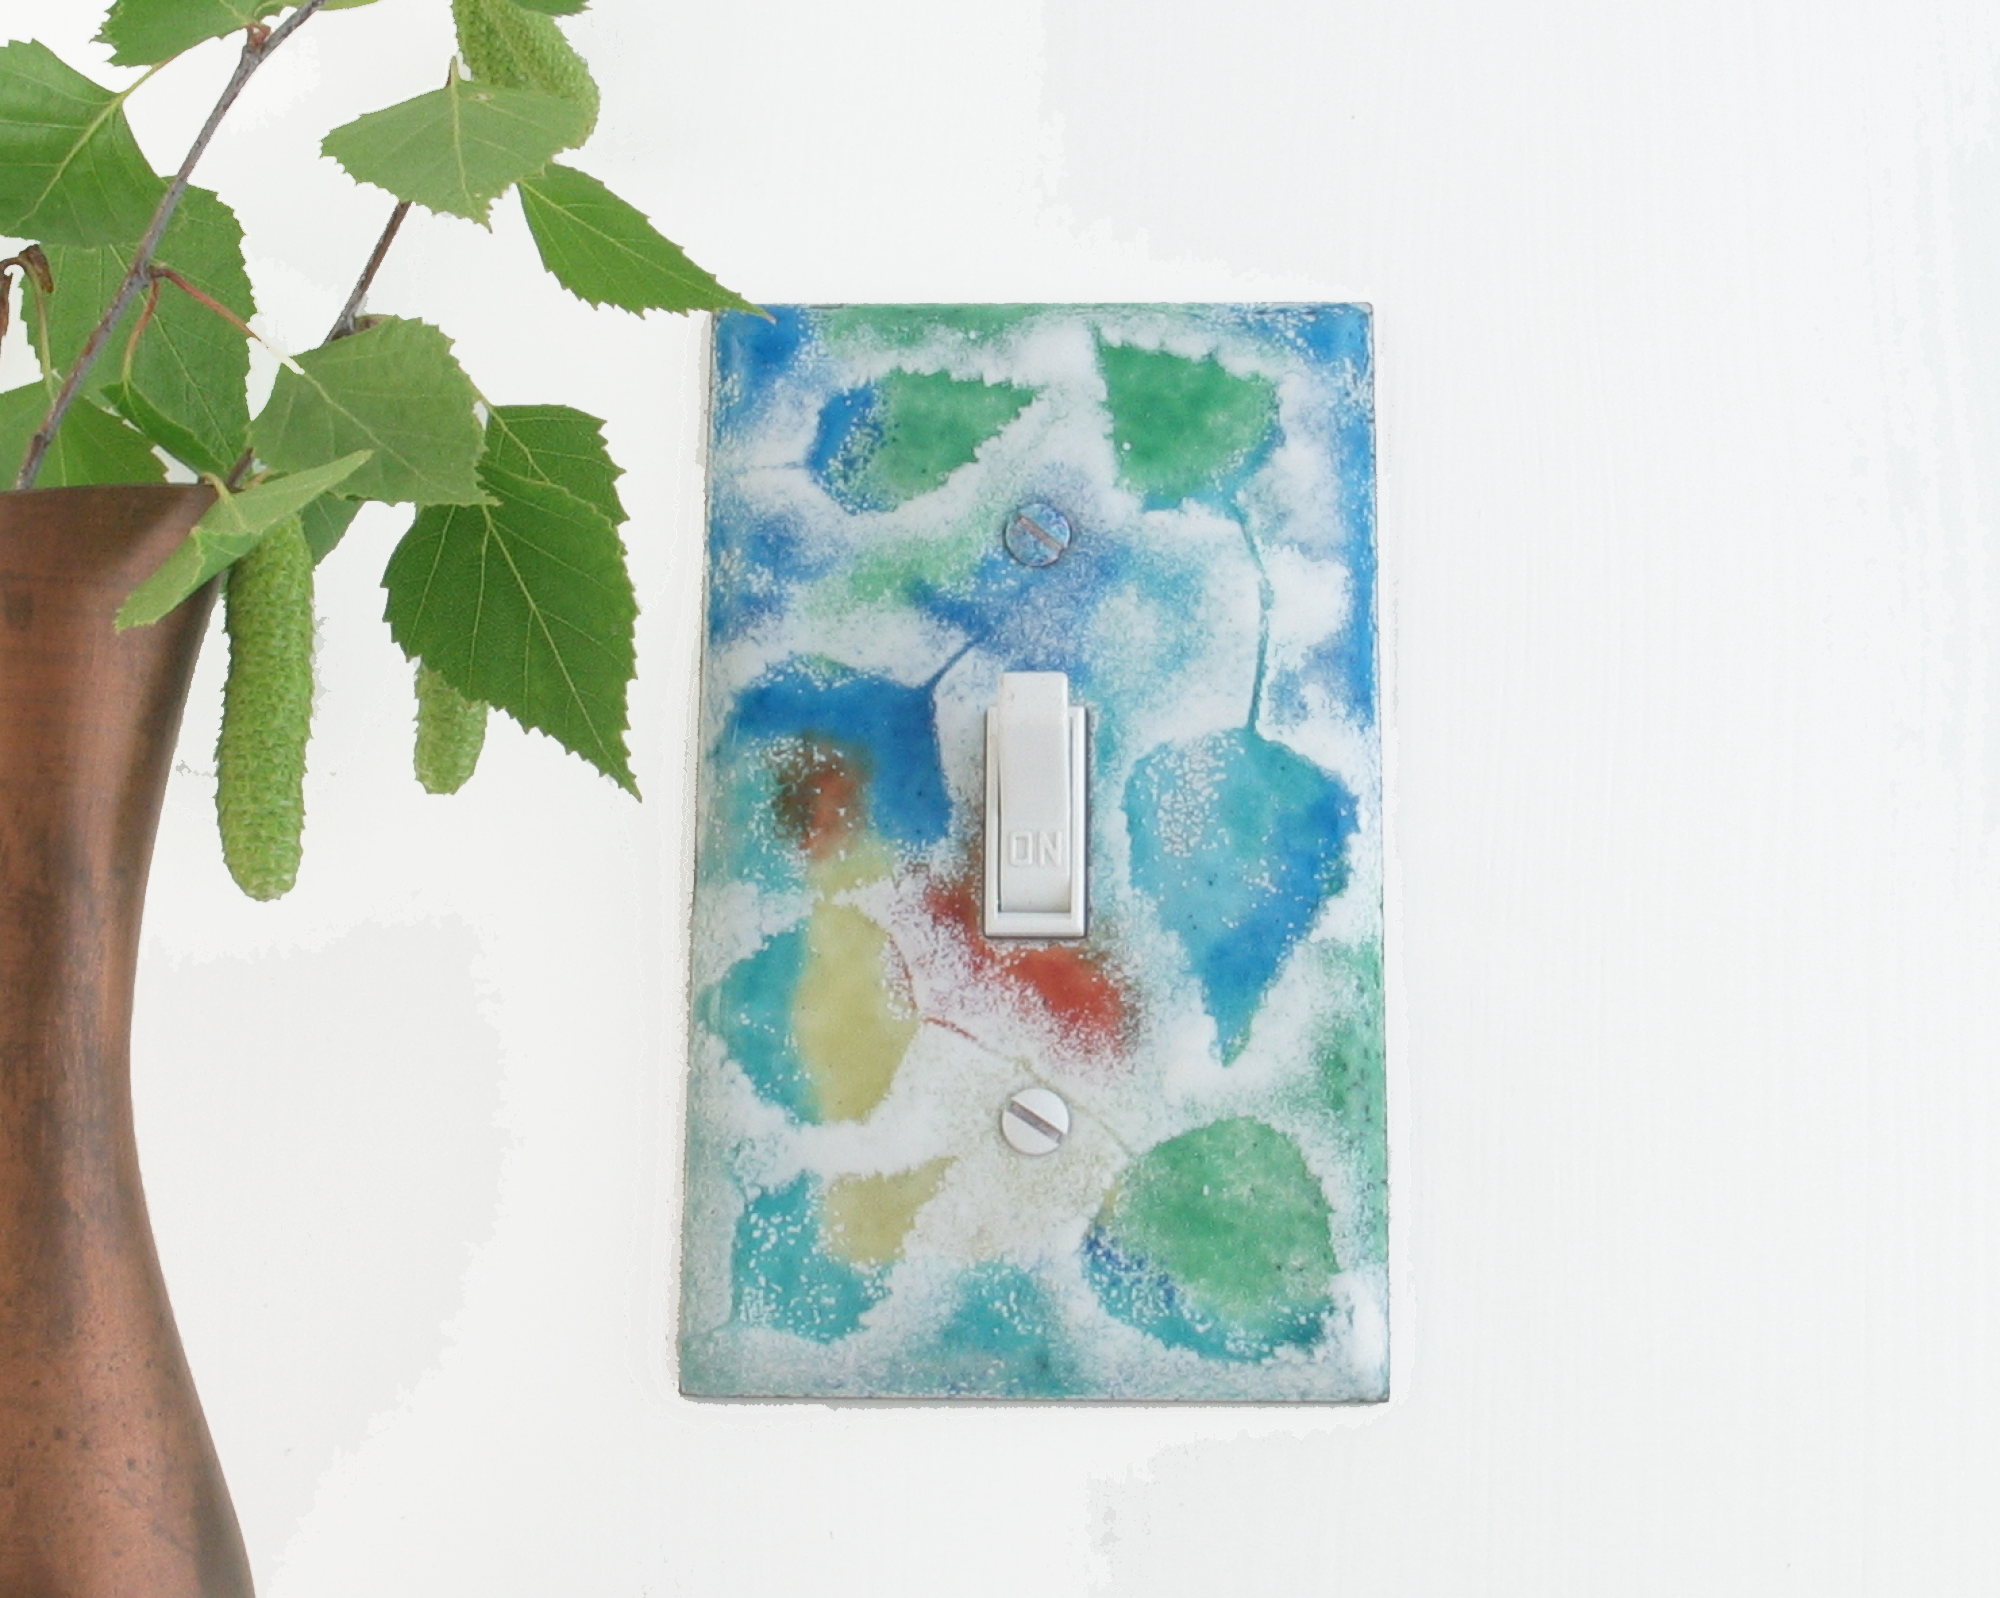 Birch Leaf Memorial single light switch cover plate